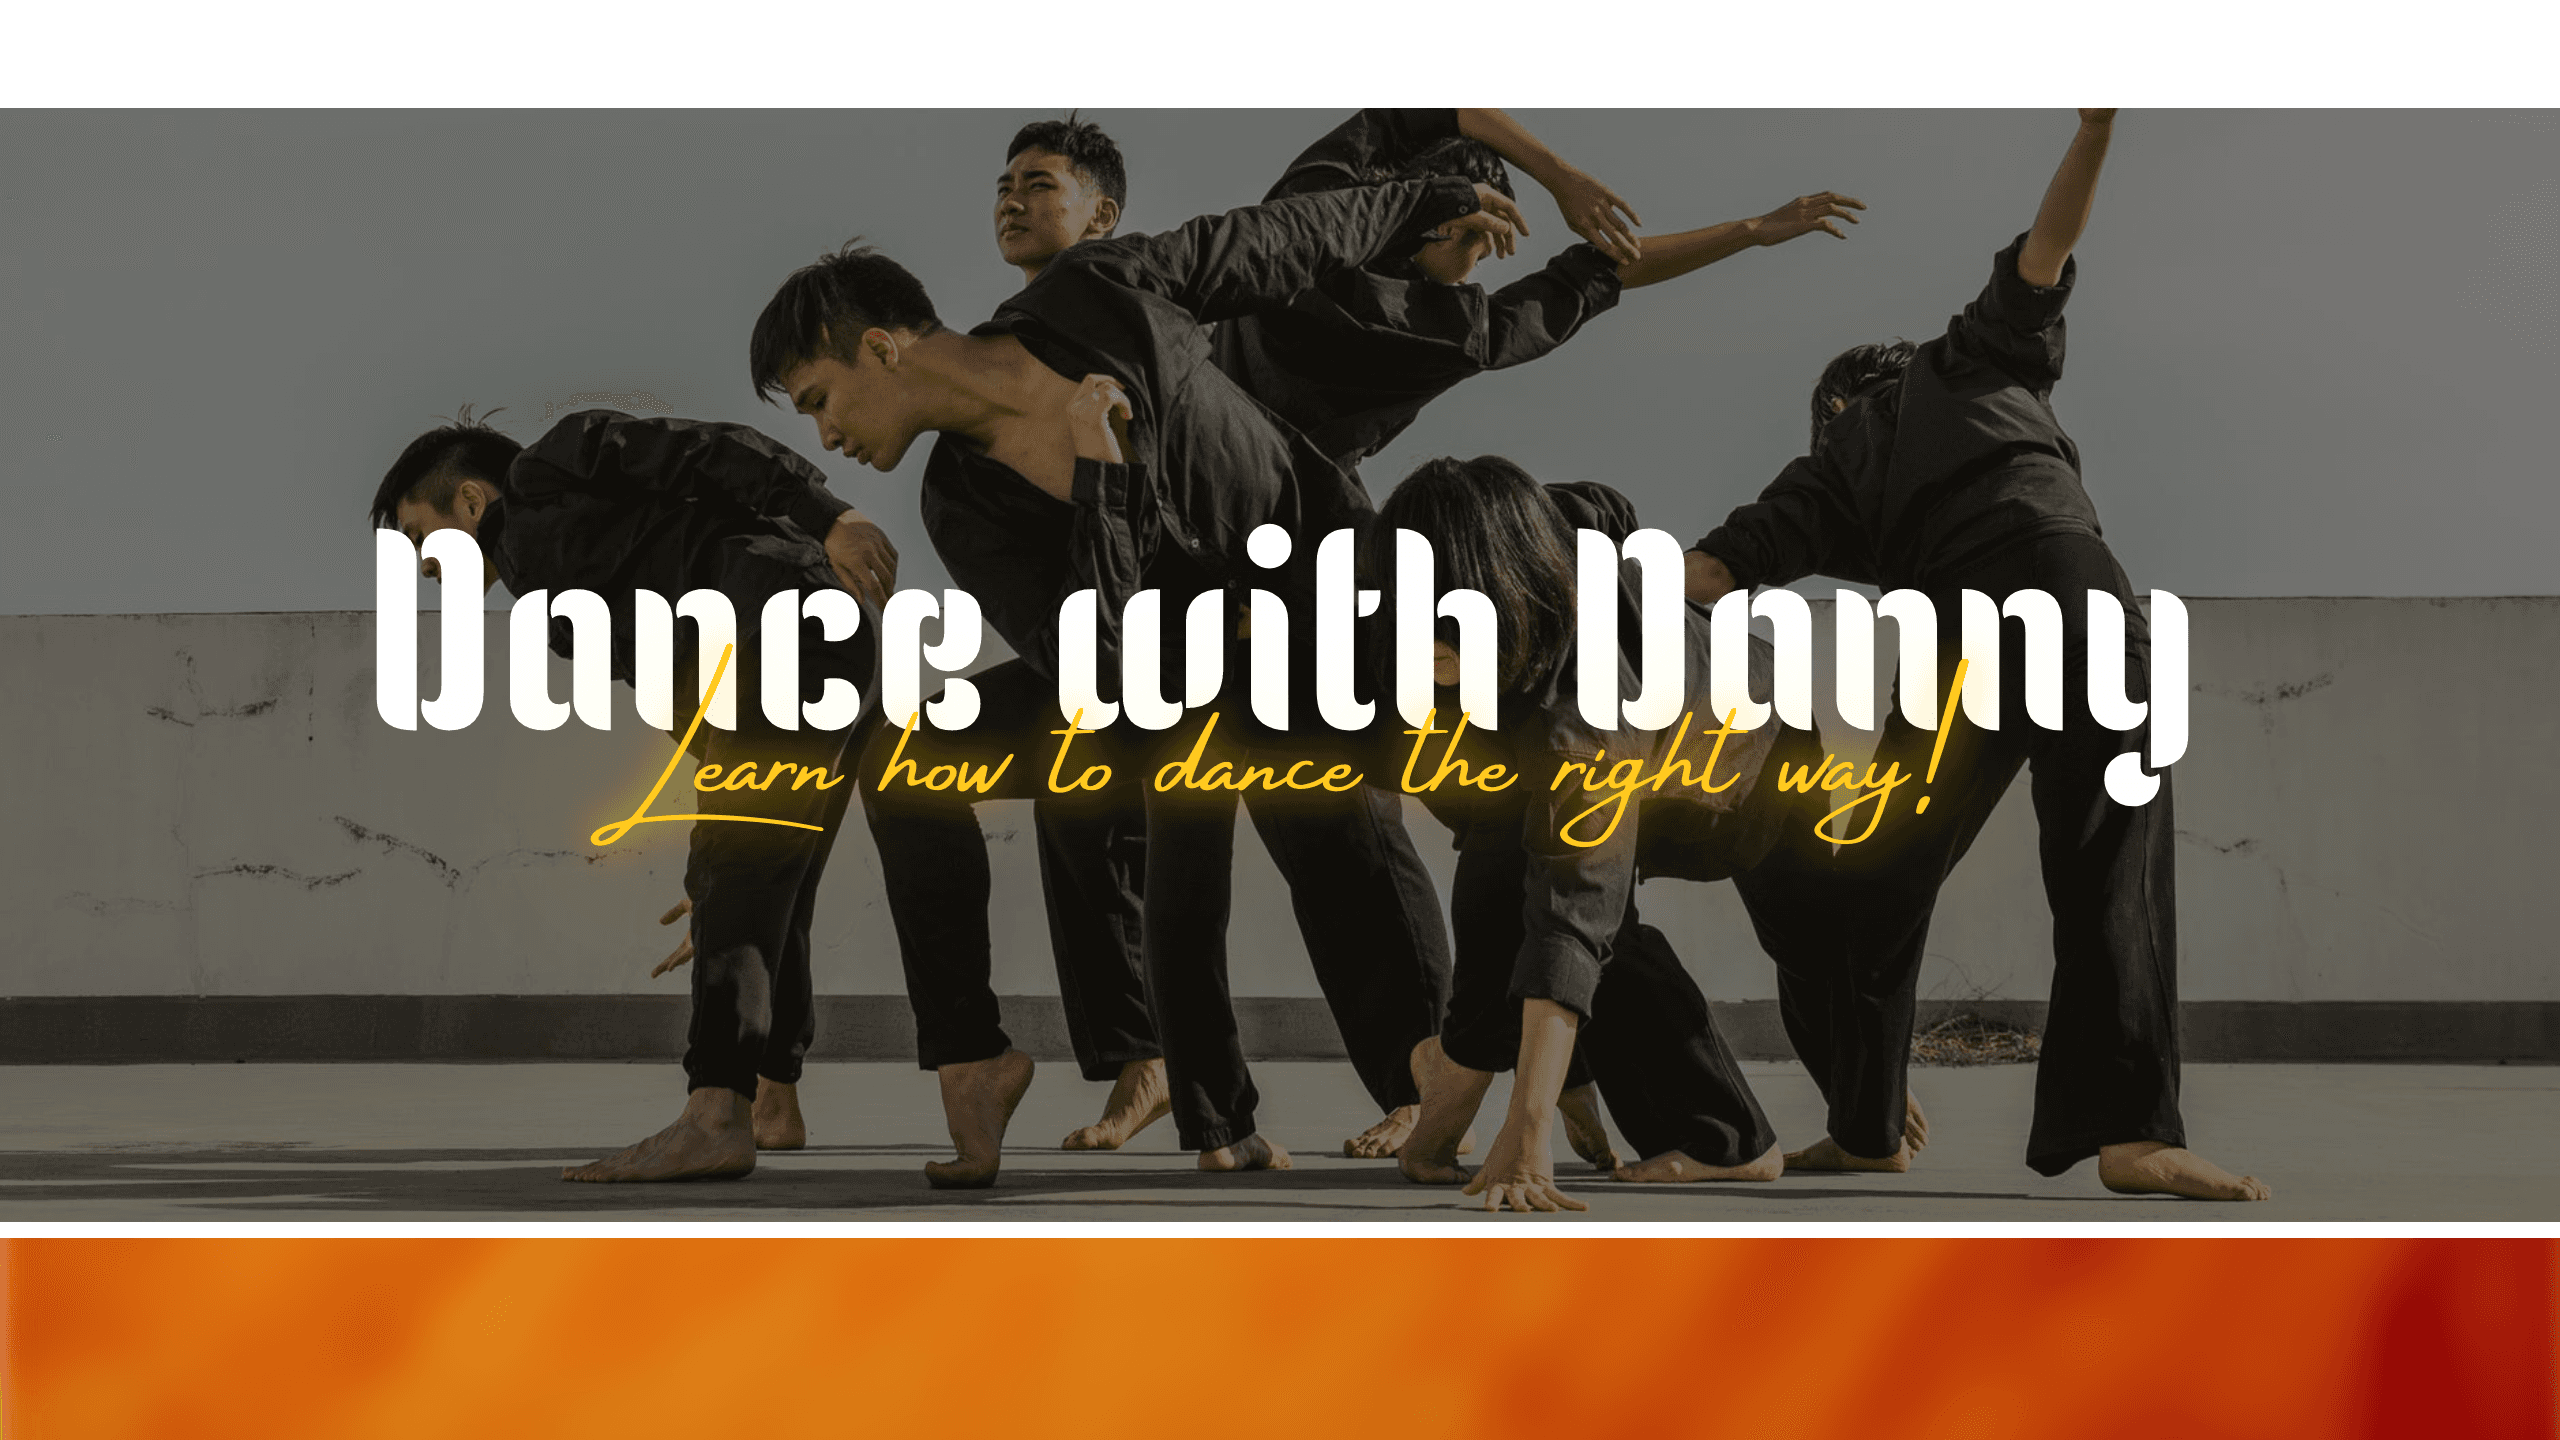 dancing-group-and-learn-to-dance-classes-youtube-channel-art-thumbnail-img